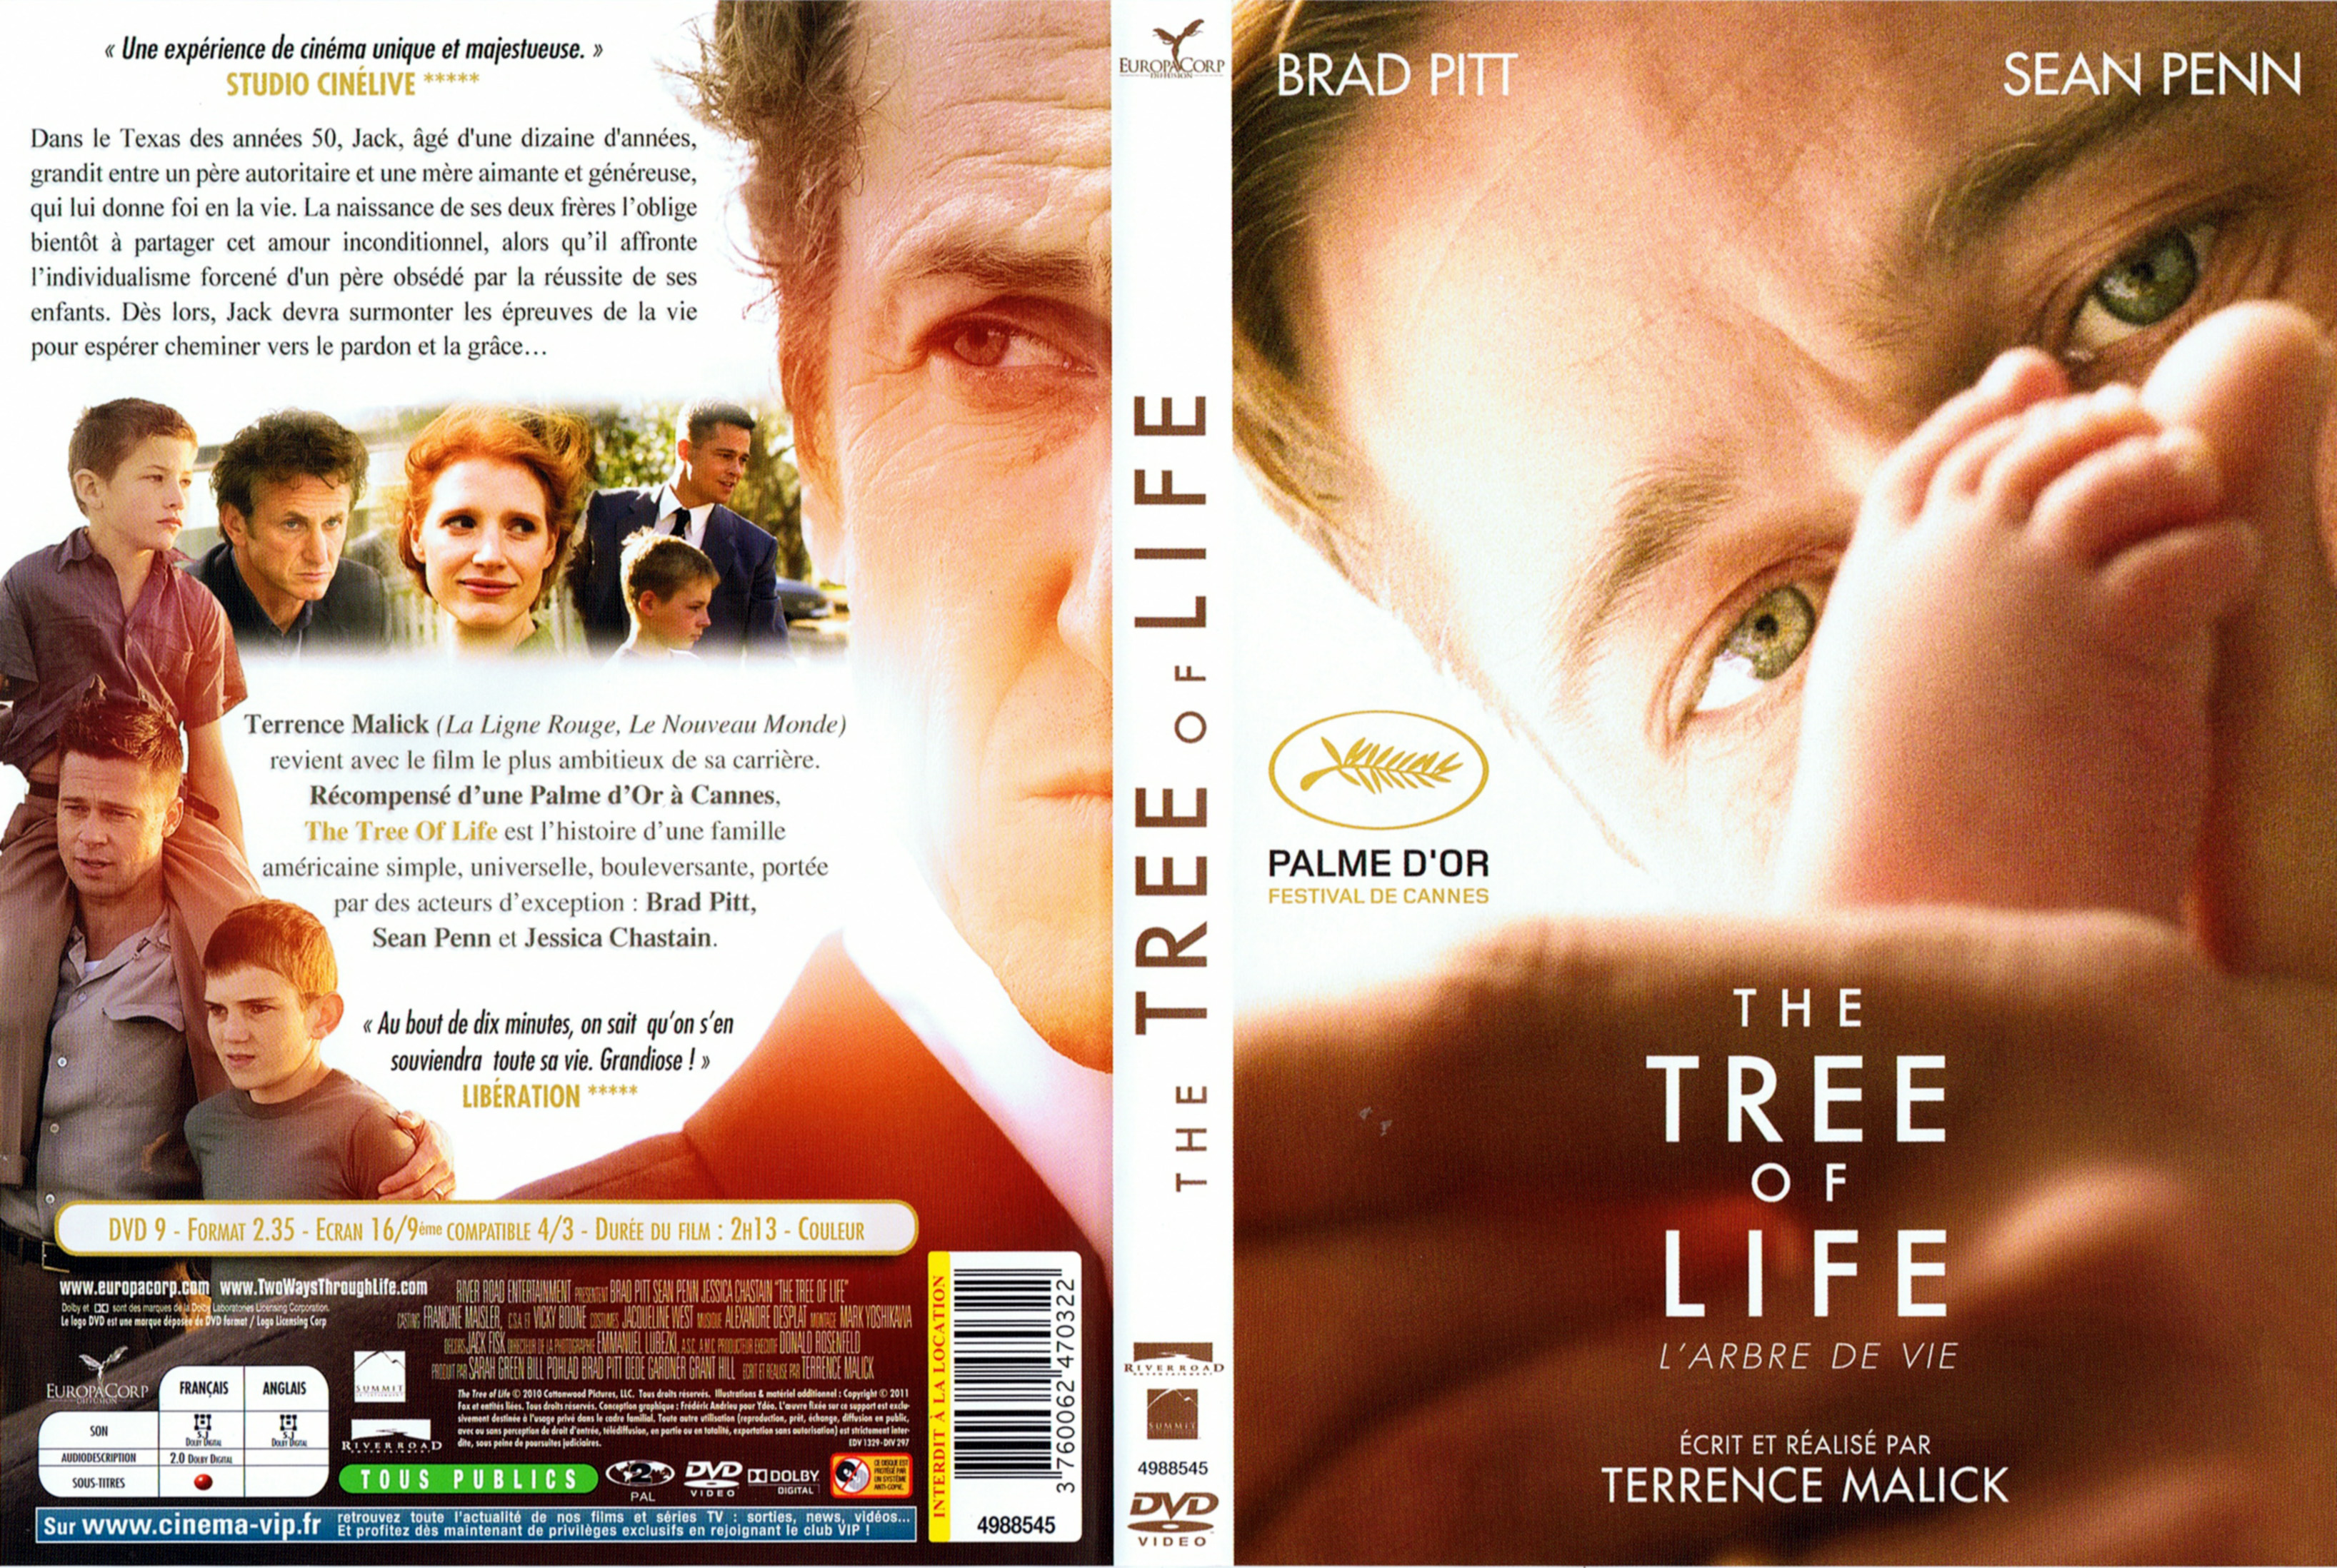 Jaquette DVD The tree of life